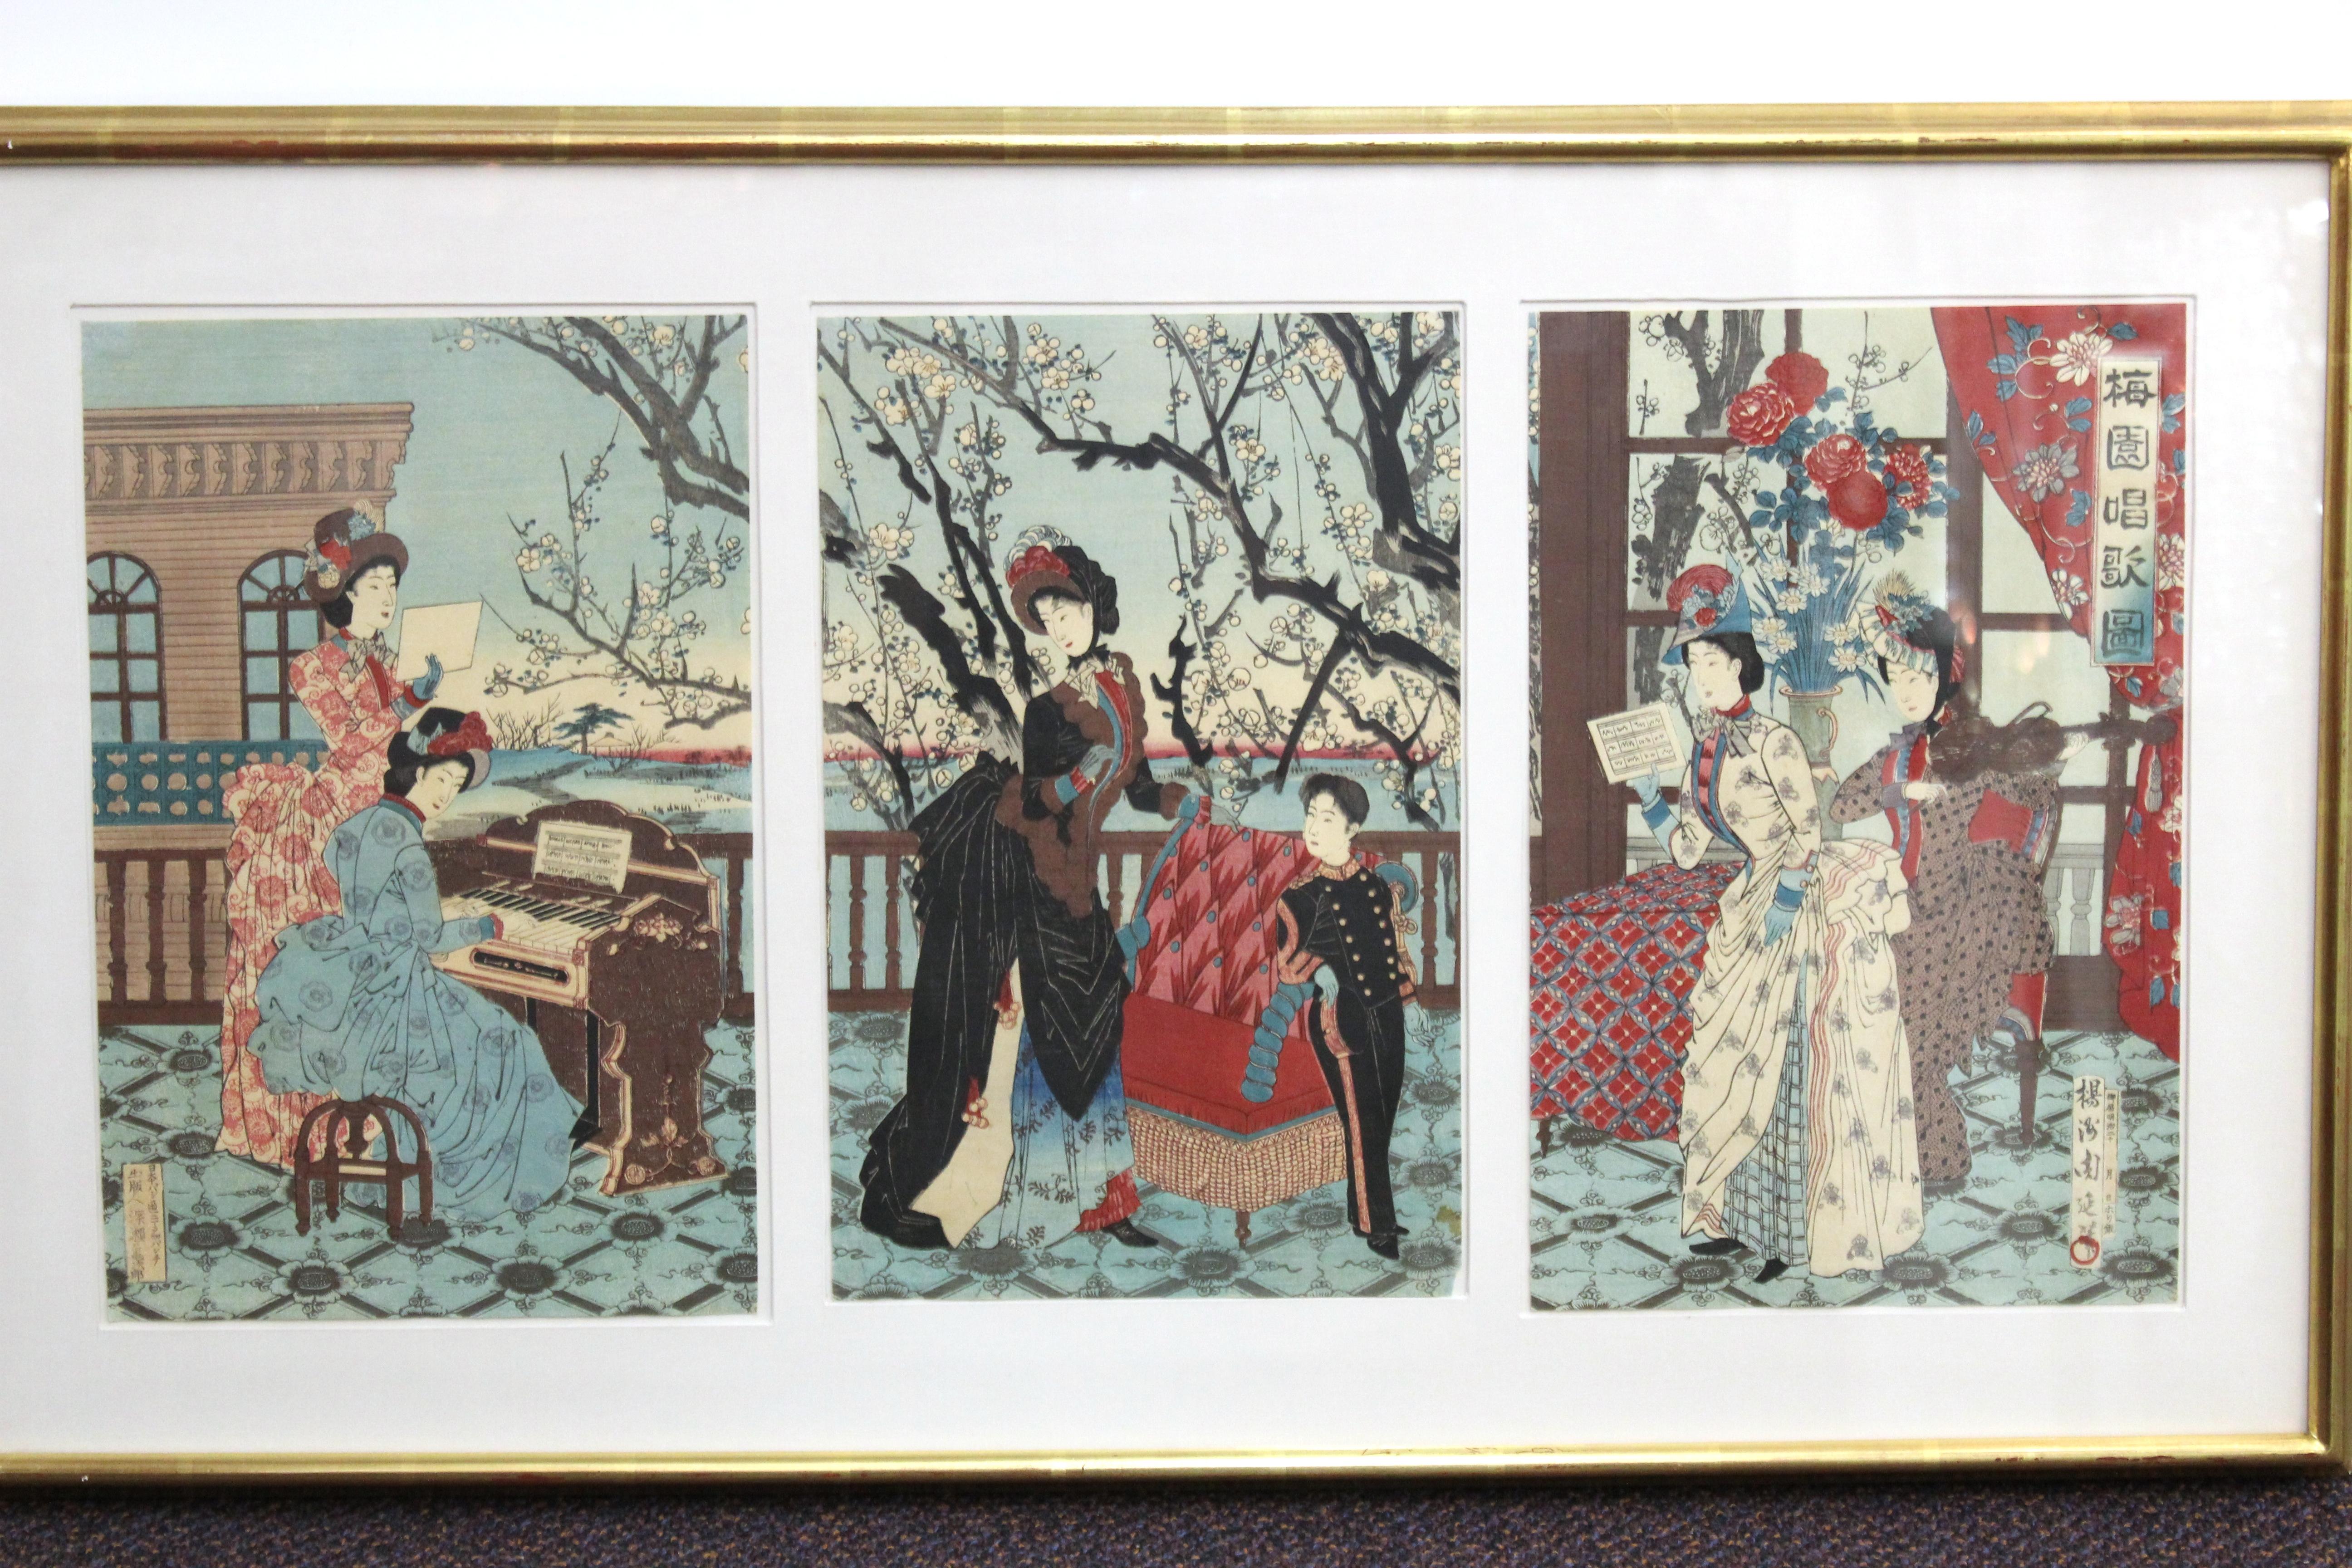 Japanese Meiji period framed set of three woodblock prints from the 'Plum Garden' series, made by Toyohana Chikanobu (1838-1912). An example of this print is at the Kanagawa Prefecture Museum in Yokohama. 
The set dates from circa 1880. The first